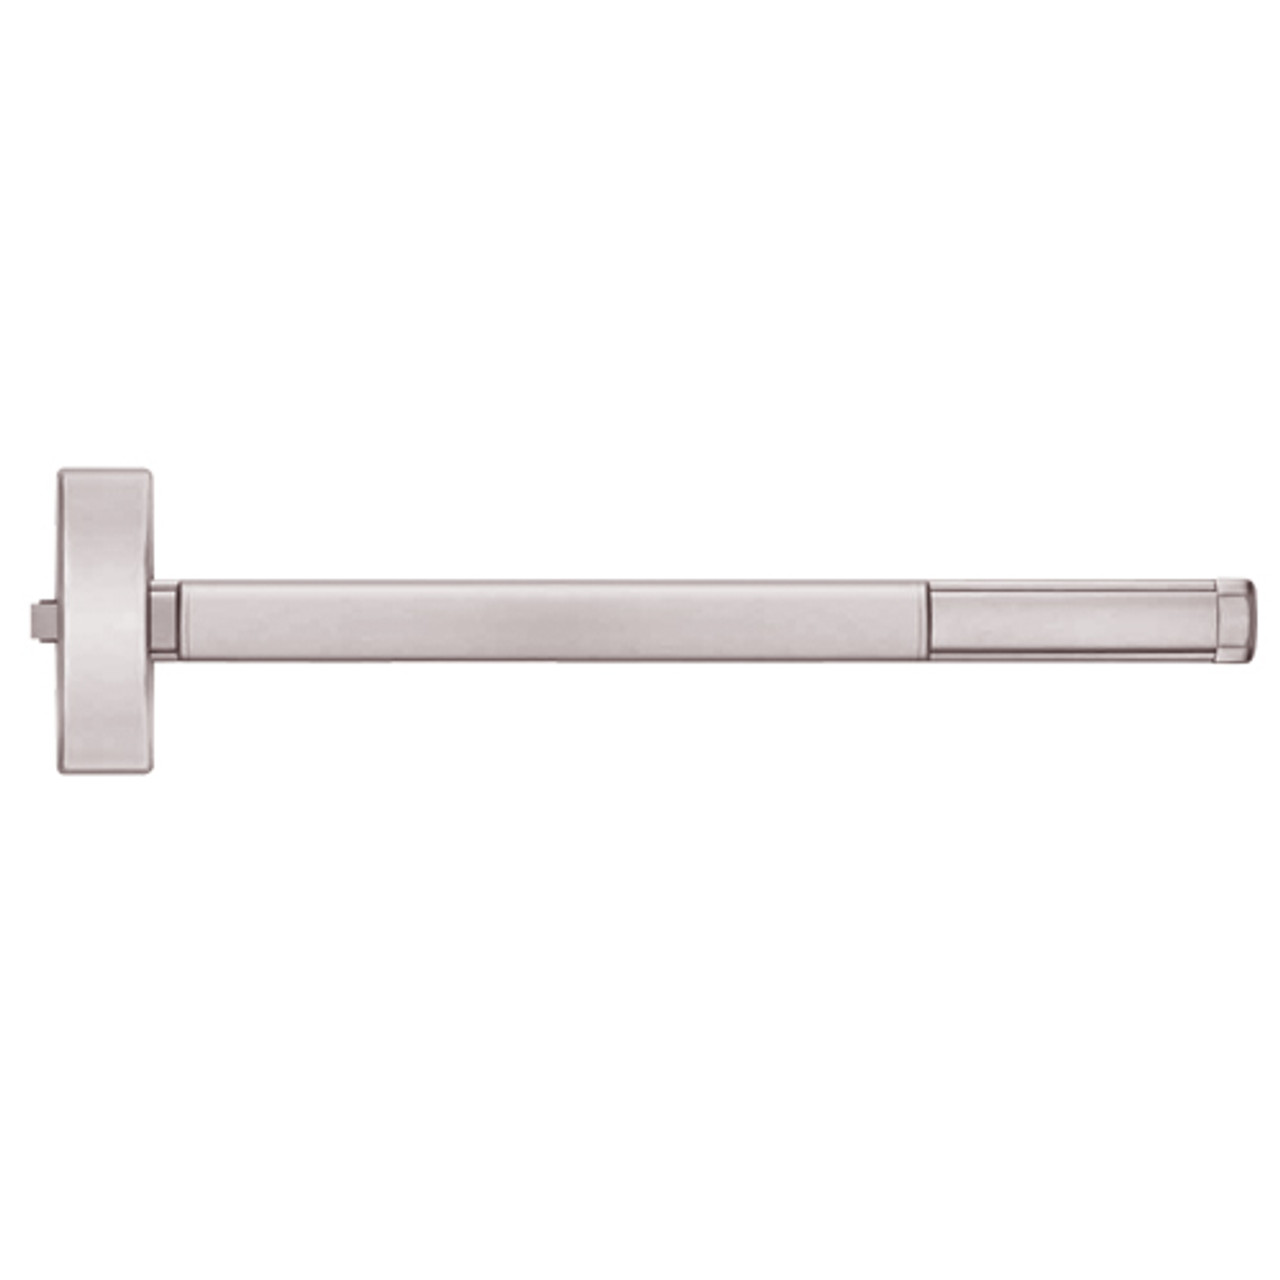 MLR2103-628-48 PHI 2100 Series Non Fire Rated Apex Rim Exit Device with Motorized Latch Retraction Prepped for Key Retracts Latchbolt in Satin Aluminum Finish